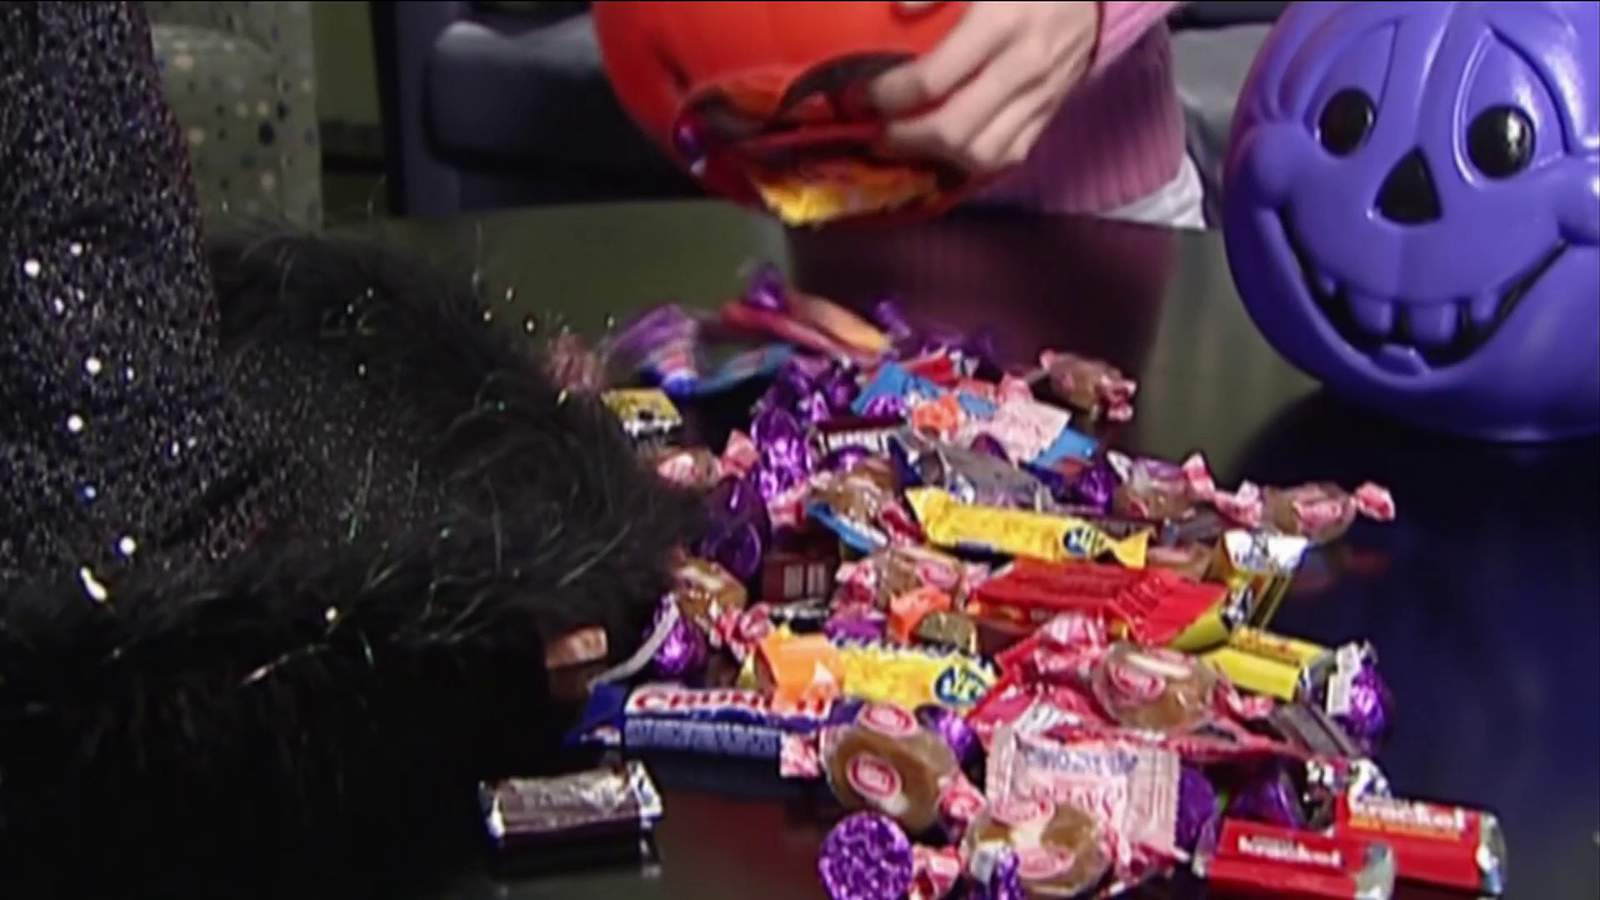 Trick-or-treating among activities discouraged by CDC this Halloween